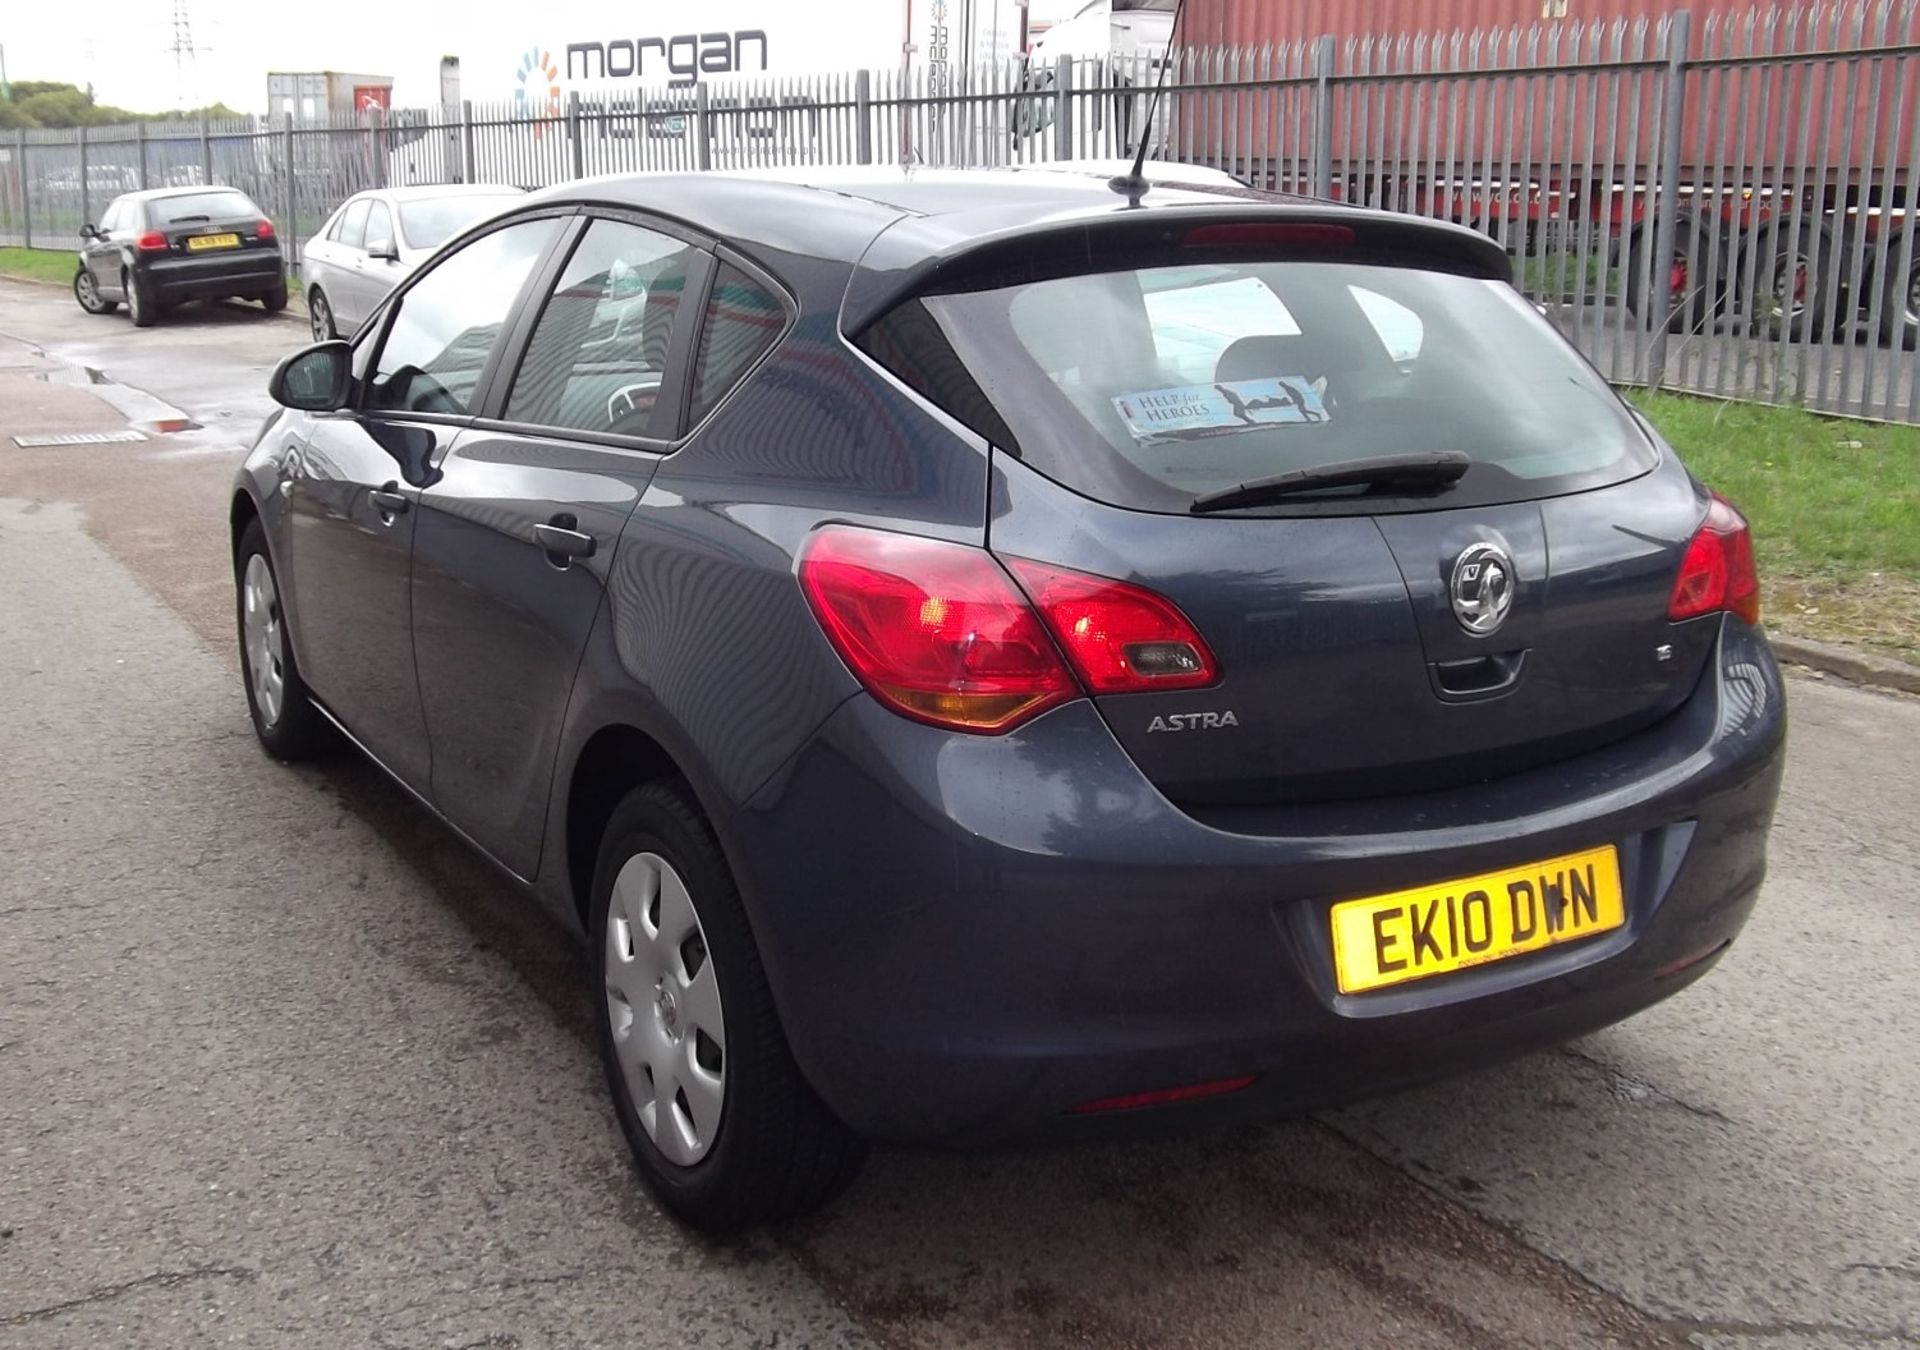 2010 Vauxhall Astra 1.6 Exclusive 5 Door Hatchback - CL505 - NO VAT ON THE HAMMER - Location: Corby, - Image 2 of 9